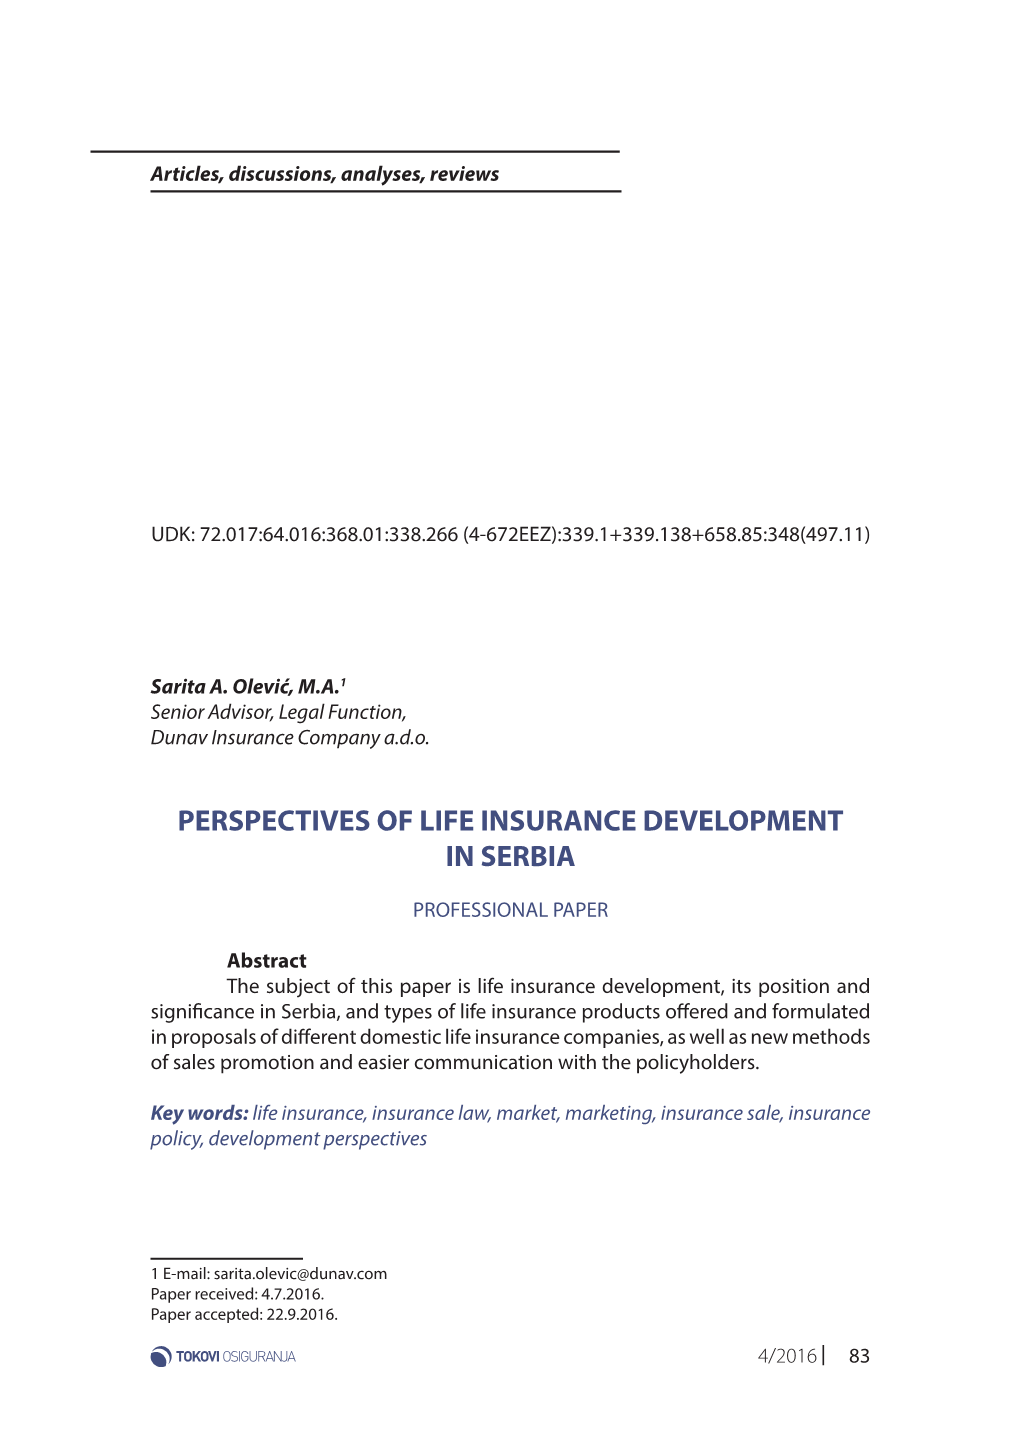 Perspectives of Life Insurance Development in Serbia